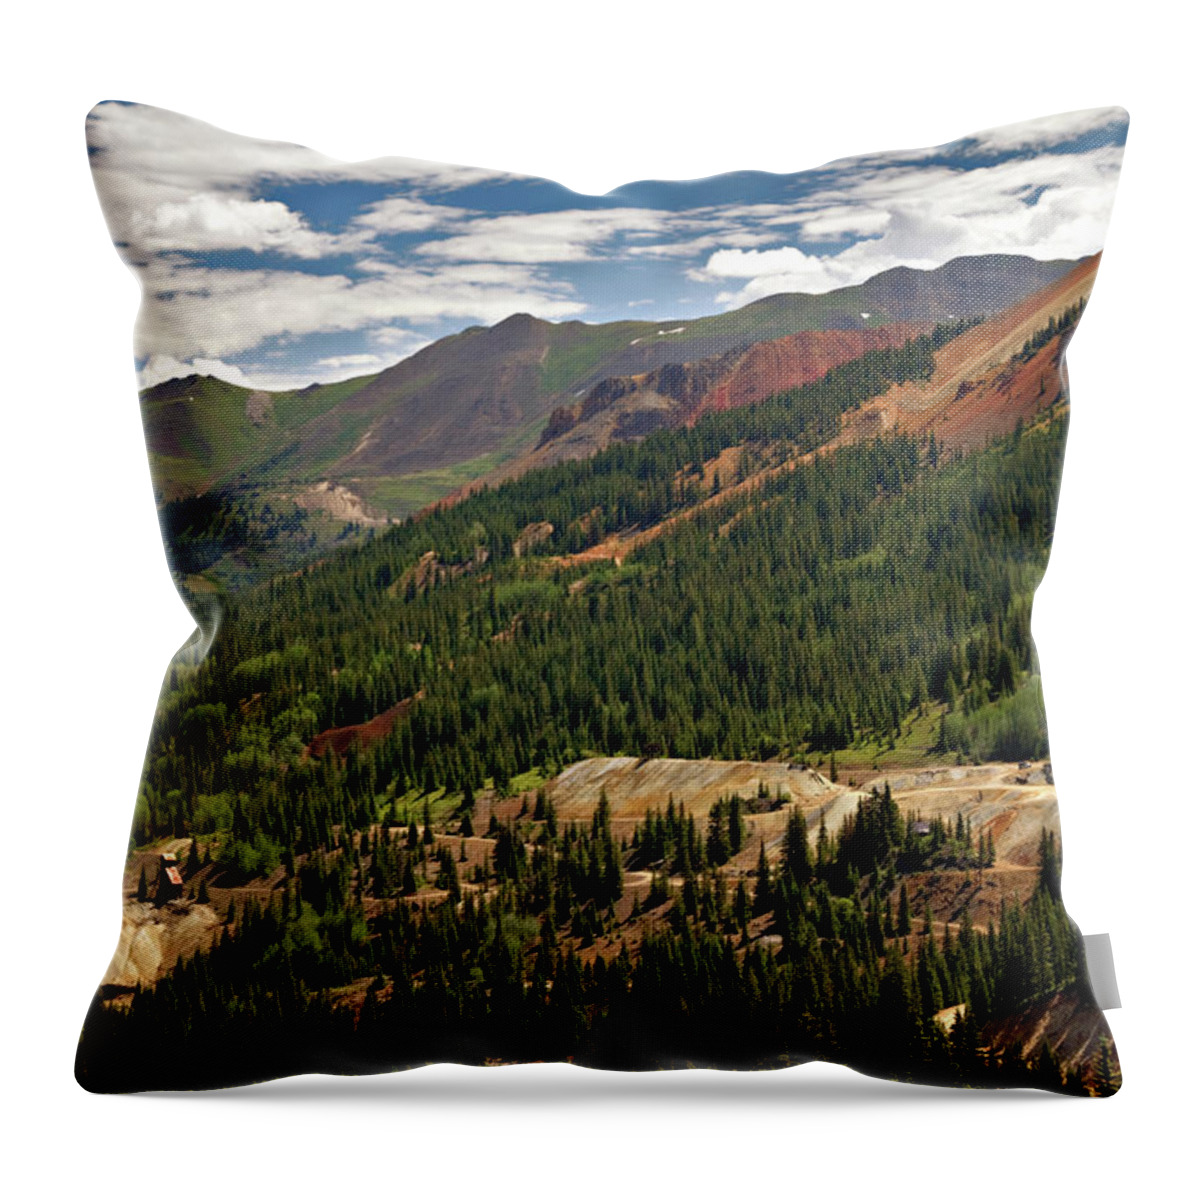 Abandoned Throw Pillow featuring the digital art Red Mountain Mining - 550 View by Lana Trussell